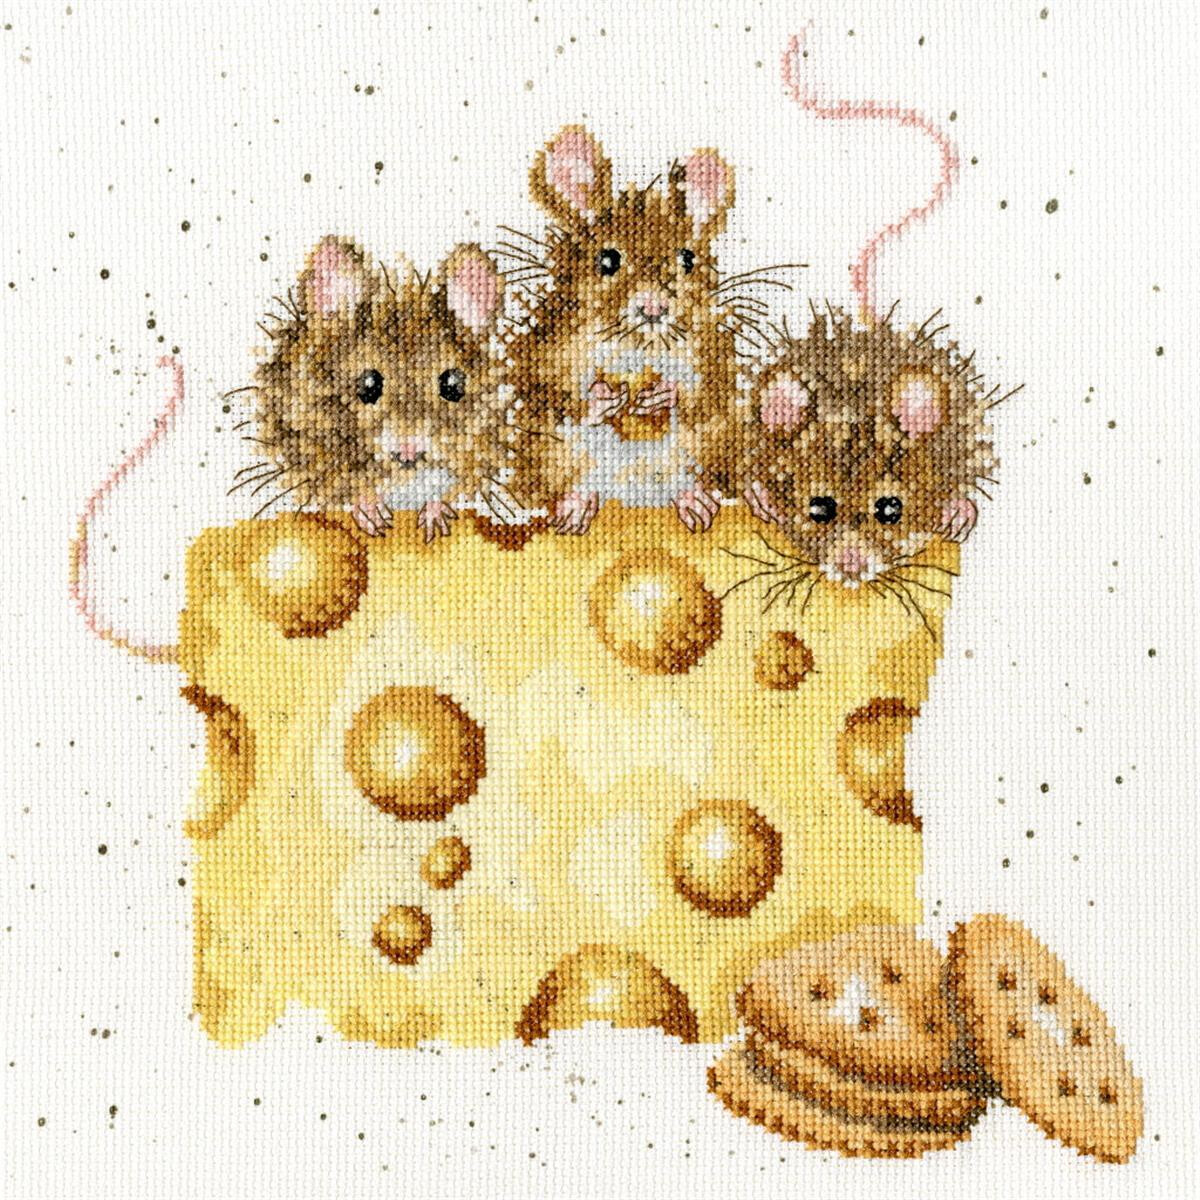 Three small, fluffy mice sit on a large piece of Swiss...